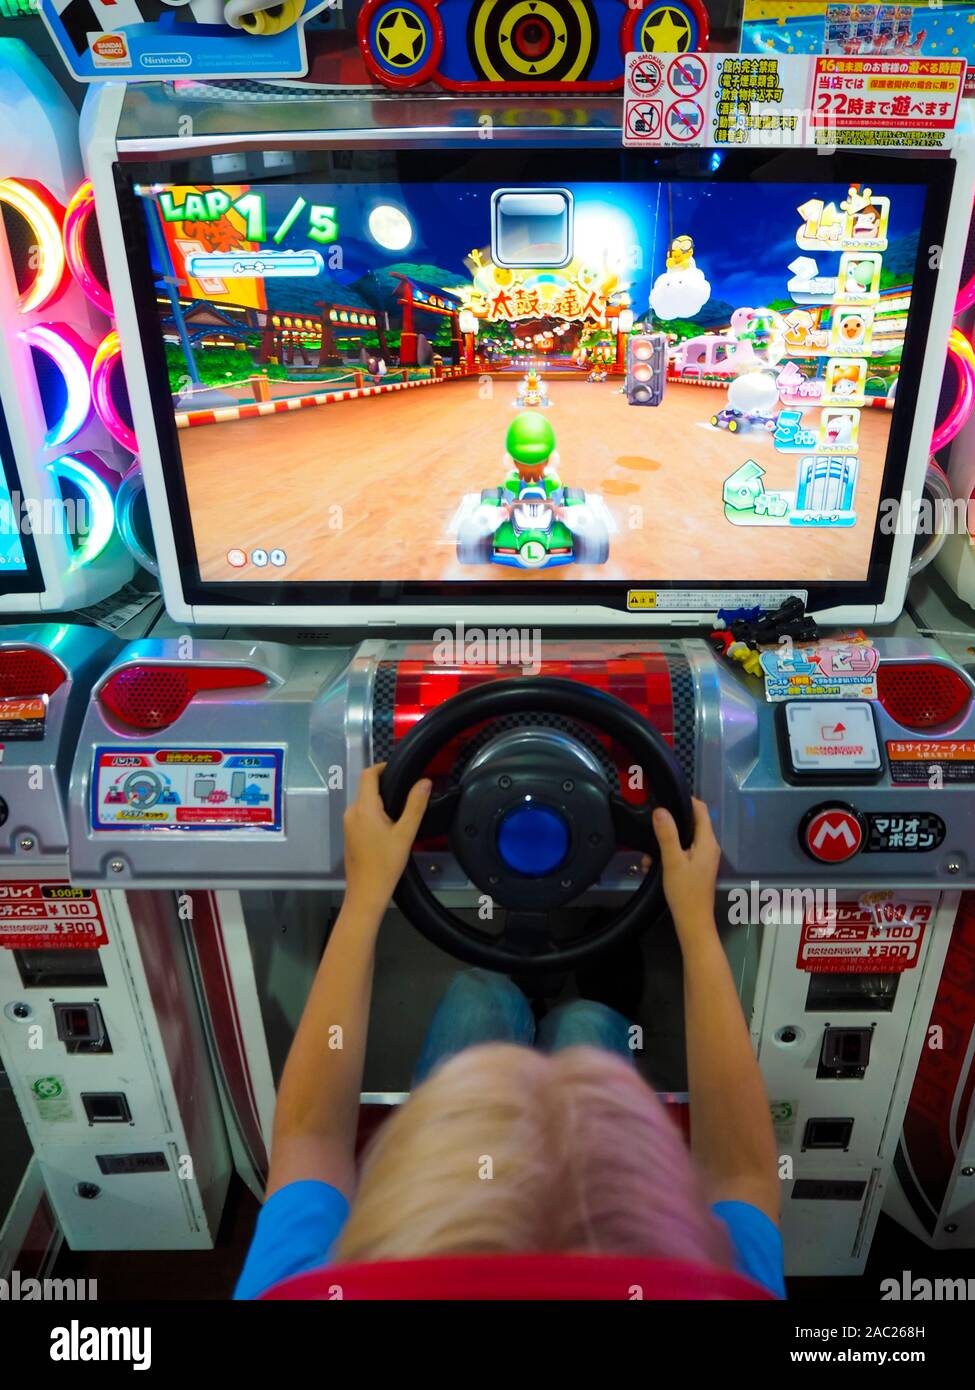 Tokyo, Japan - 12 Oct 2018: A boy is playing a Mario Cart video game at an amusement arcade in Tokyo, Japan. Stock Photo